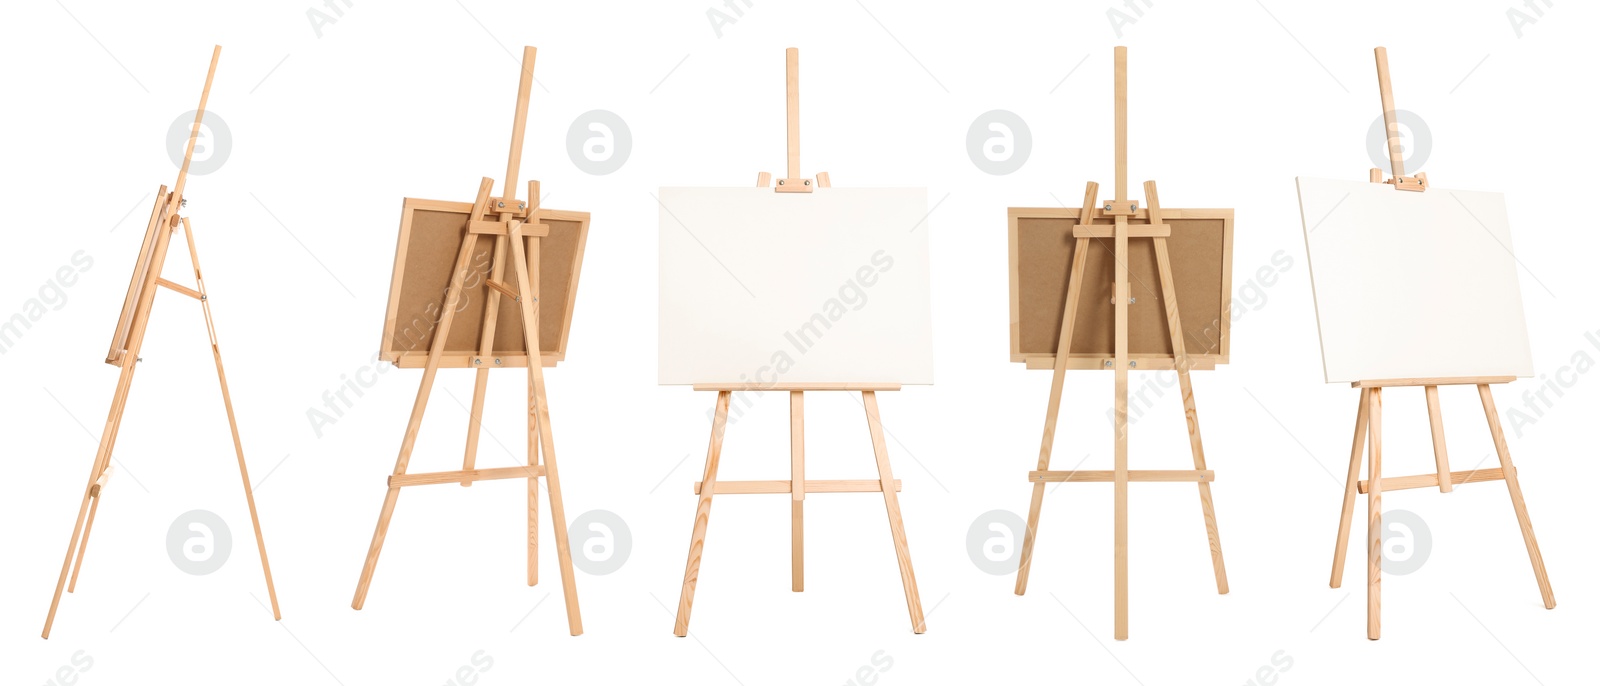 Image of Wooden easel isolated on white, different sides